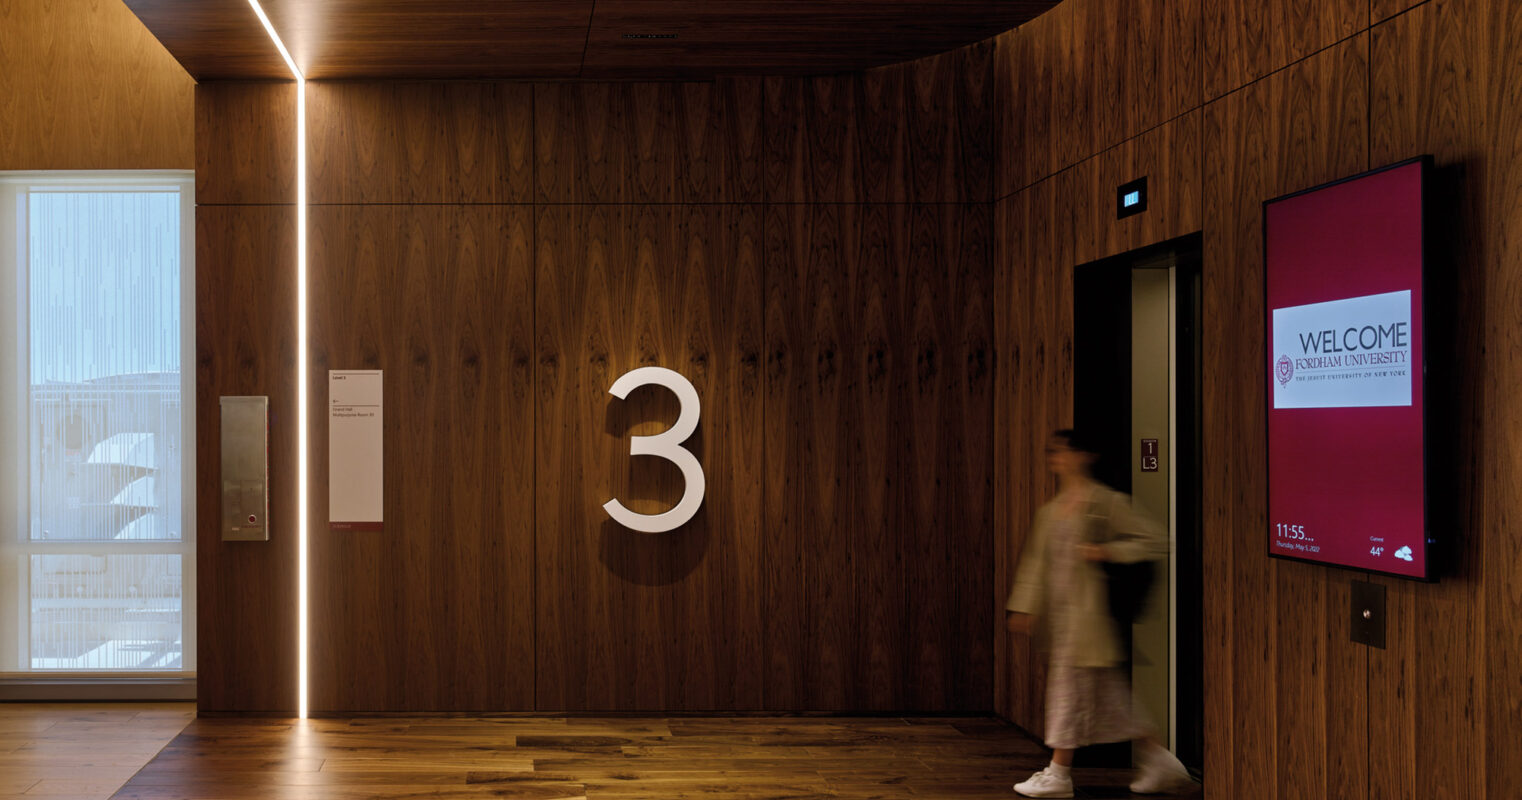 Modern office building interior with a large number '3' on the wall, warm wooden panels, ambient lighting, and a person walking through the hallway.